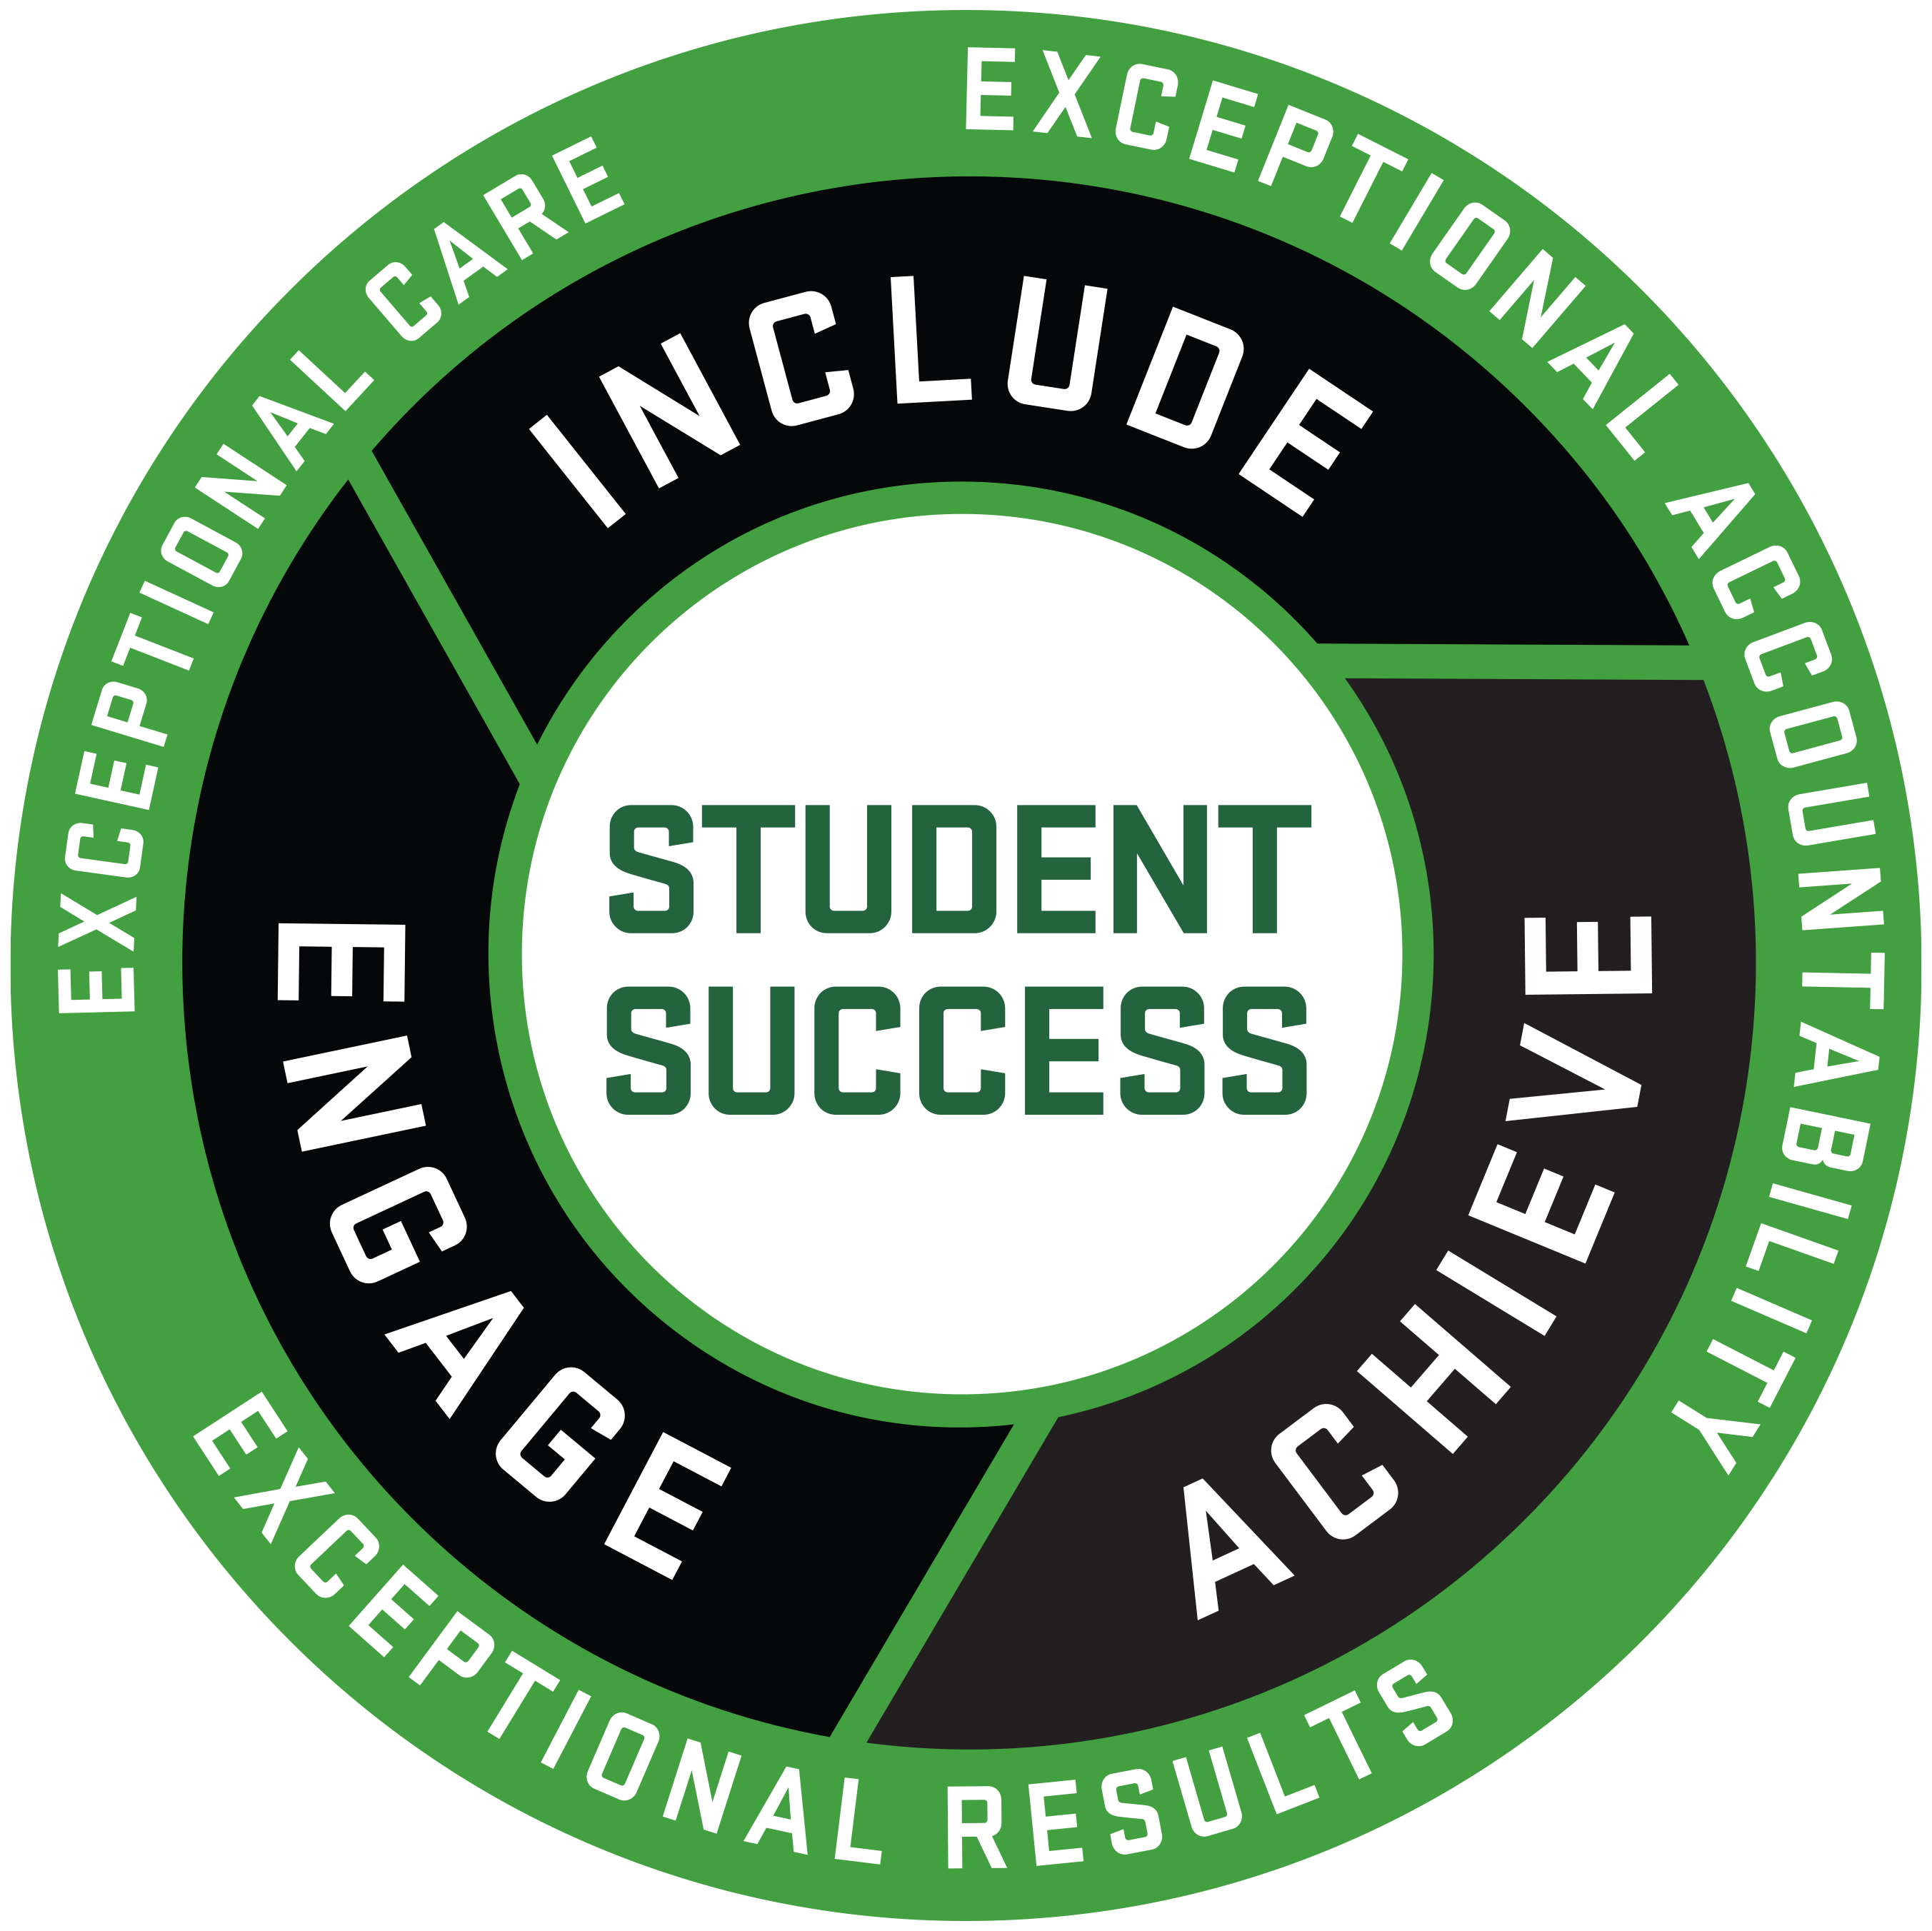 Student Success, Achieve, Engage, Include